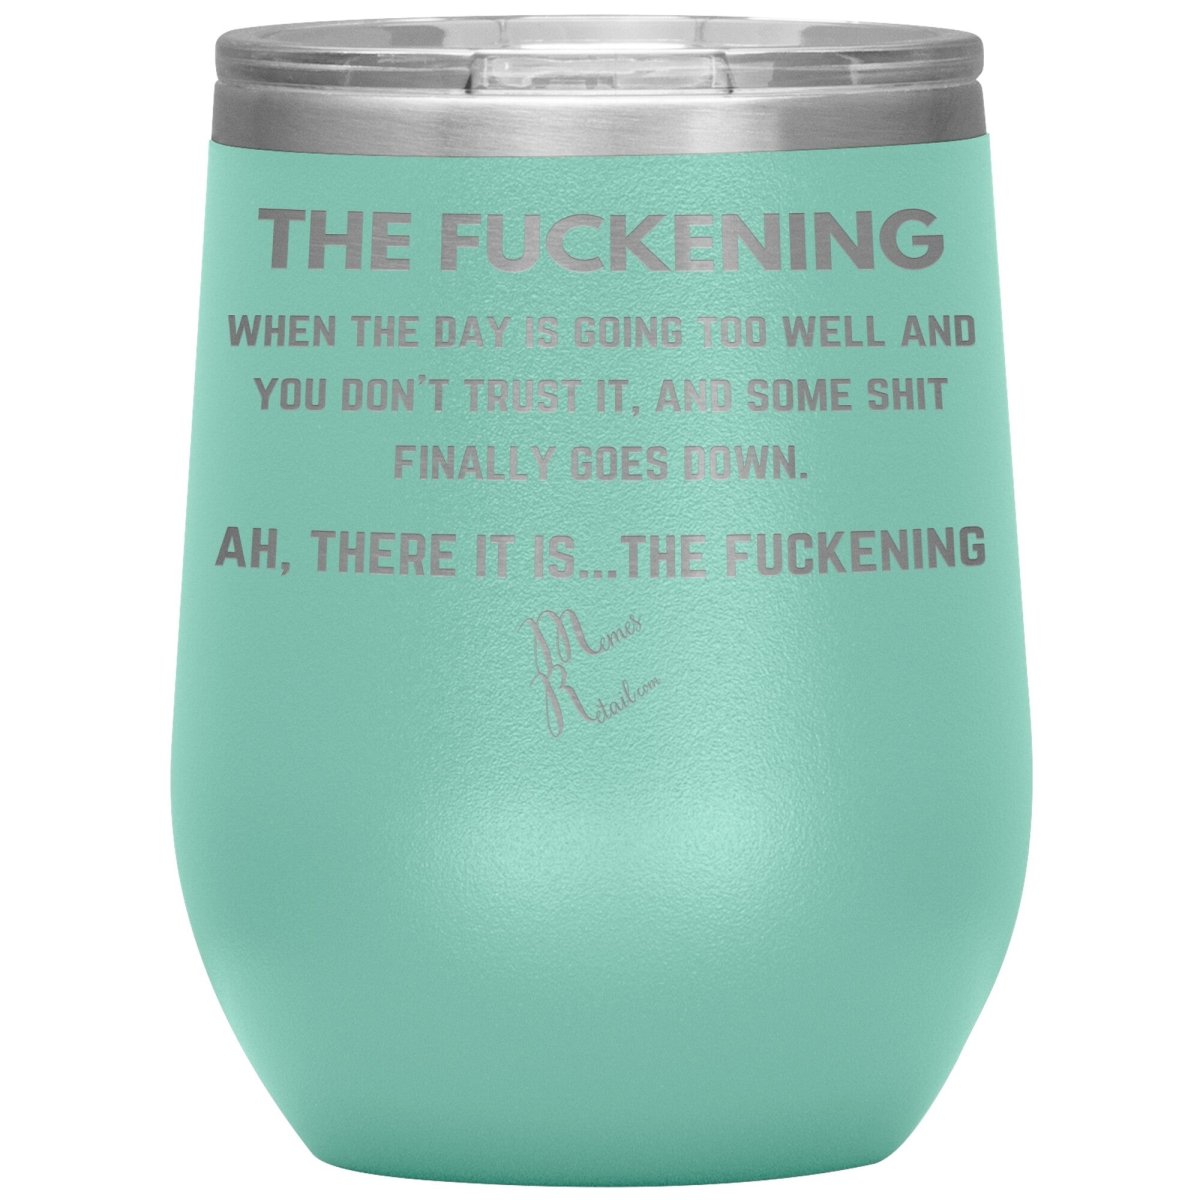 The Fuckening, When you don't trust the day Tumblers, 12oz Wine Insulated Tumbler / Teal - MemesRetail.com